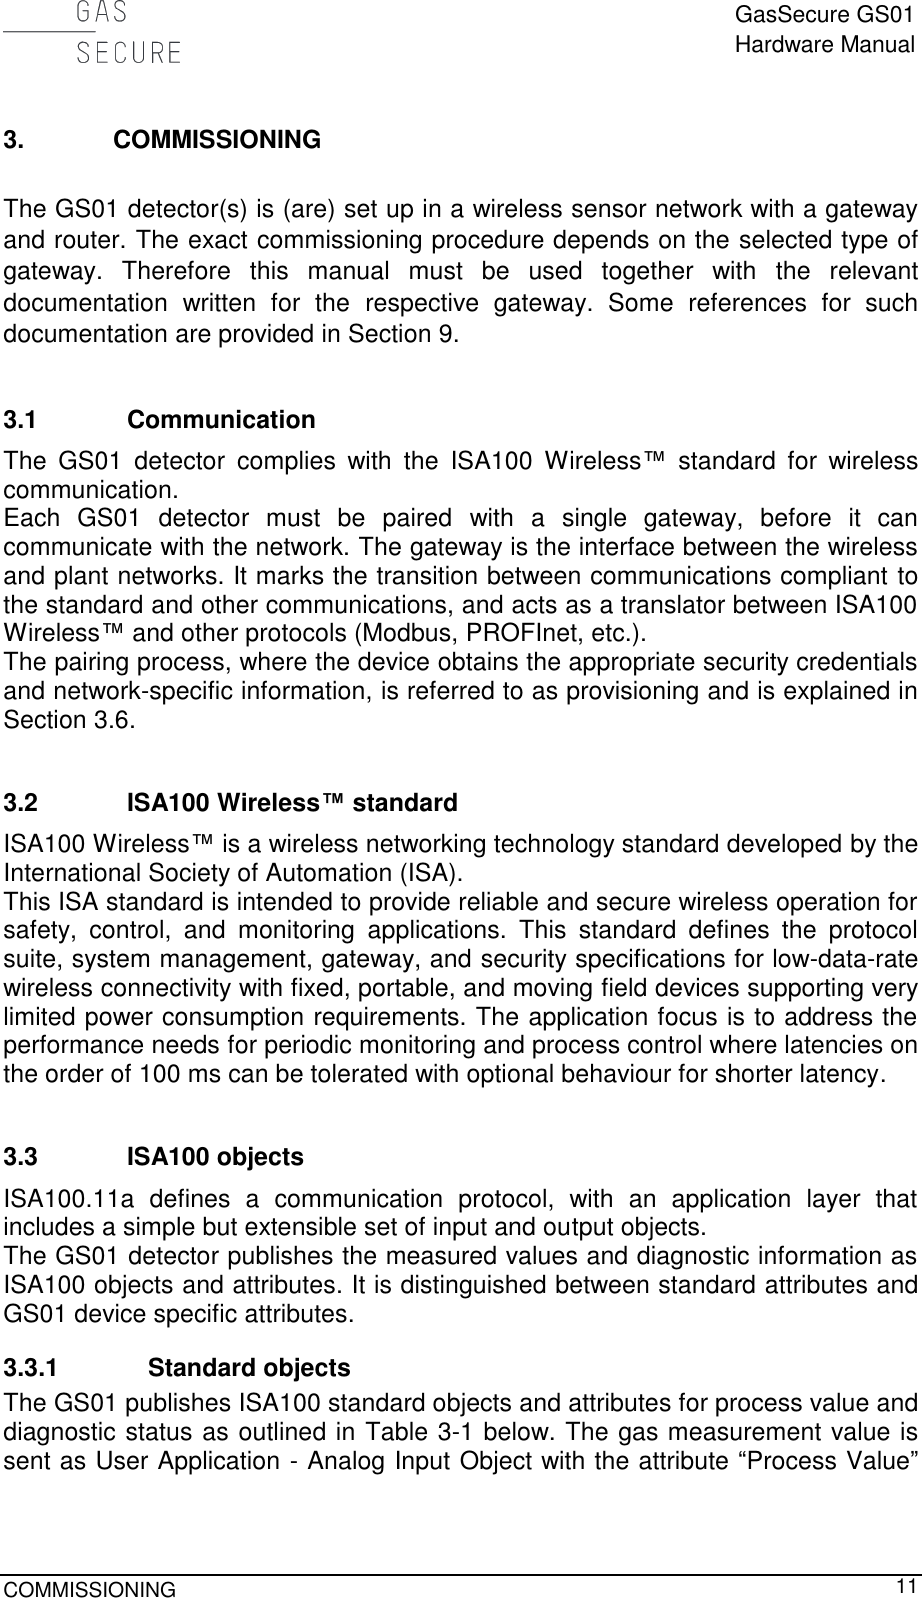  GasSecure GS01 Hardware Manual  COMMISSIONING     11 3. COMMISSIONING  The GS01 detector(s) is (are) set up in a wireless sensor network with a gateway and router. The exact commissioning procedure depends on the selected type of gateway.  Therefore  this  manual  must  be  used  together  with  the  relevant documentation  written  for  the  respective  gateway.  Some  references  for  such documentation are provided in Section 9.  3.1 Communication The  GS01  detector  complies  with  the  ISA100  Wireless™  standard  for  wireless communication. Each  GS01  detector  must  be  paired  with  a  single  gateway,  before  it  can communicate with the network. The gateway is the interface between the wireless and plant networks. It marks the transition between communications compliant to the standard and other communications, and acts as a translator between ISA100 Wireless™ and other protocols (Modbus, PROFInet, etc.). The pairing process, where the device obtains the appropriate security credentials and network-specific information, is referred to as provisioning and is explained in Section 3.6.  3.2 ISA100 Wireless™ standard ISA100 Wireless™ is a wireless networking technology standard developed by the International Society of Automation (ISA). This ISA standard is intended to provide reliable and secure wireless operation for safety,  control,  and  monitoring  applications.  This  standard  defines  the  protocol suite, system management, gateway, and security specifications for low-data-rate wireless connectivity with fixed, portable, and moving field devices supporting very limited power consumption requirements. The application focus is to address the performance needs for periodic monitoring and process control where latencies on the order of 100 ms can be tolerated with optional behaviour for shorter latency.  3.3 ISA100 objects ISA100.11a  defines  a  communication  protocol,  with  an  application  layer  that includes a simple but extensible set of input and output objects.  The GS01 detector publishes the measured values and diagnostic information as ISA100 objects and attributes. It is distinguished between standard attributes and GS01 device specific attributes. 3.3.1 Standard objects The GS01 publishes ISA100 standard objects and attributes for process value and diagnostic status as outlined in Table 3-1 below. The gas measurement value is sent as User Application - Analog Input Object with the attribute “Process Value” 